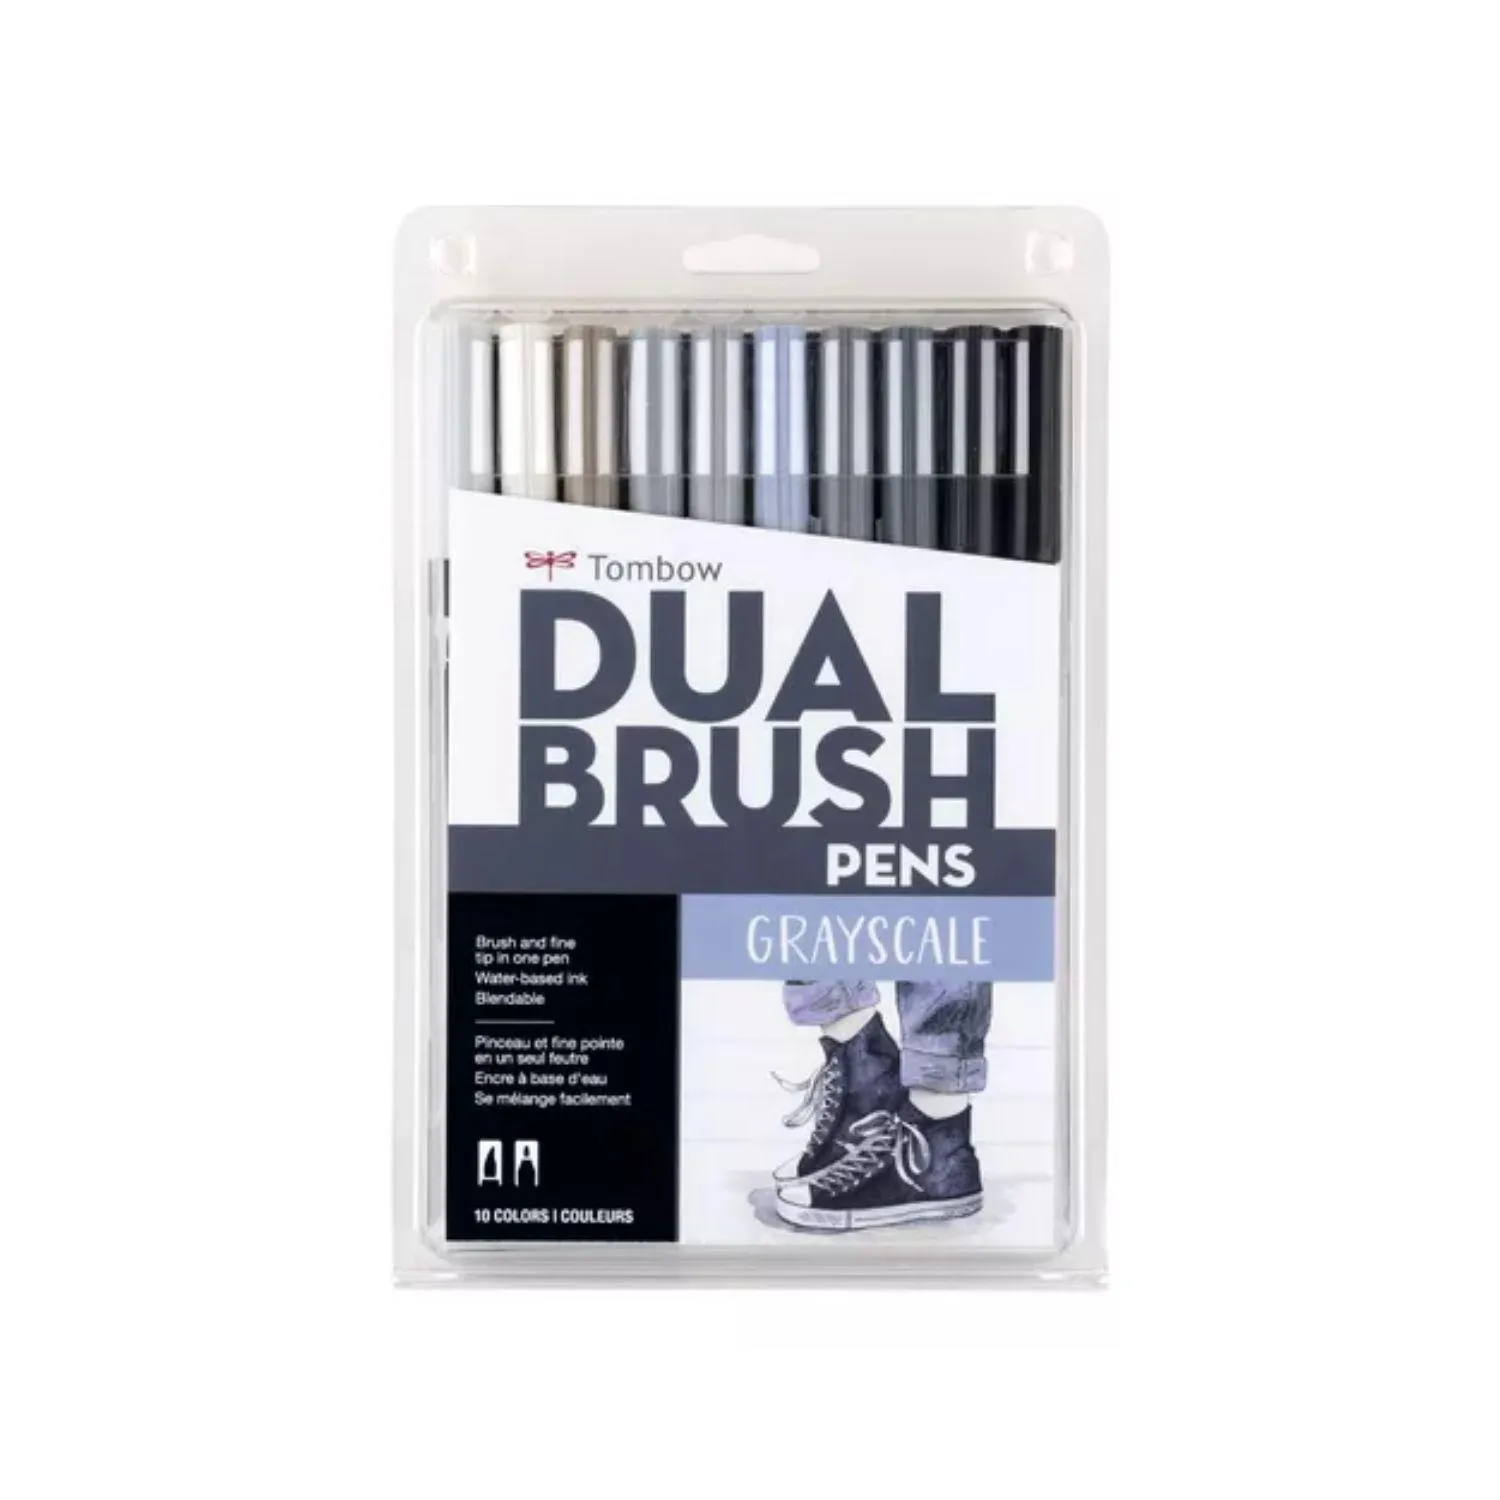 Towbow Dual Brush Pens Grayscale X 10 Ref. 56171